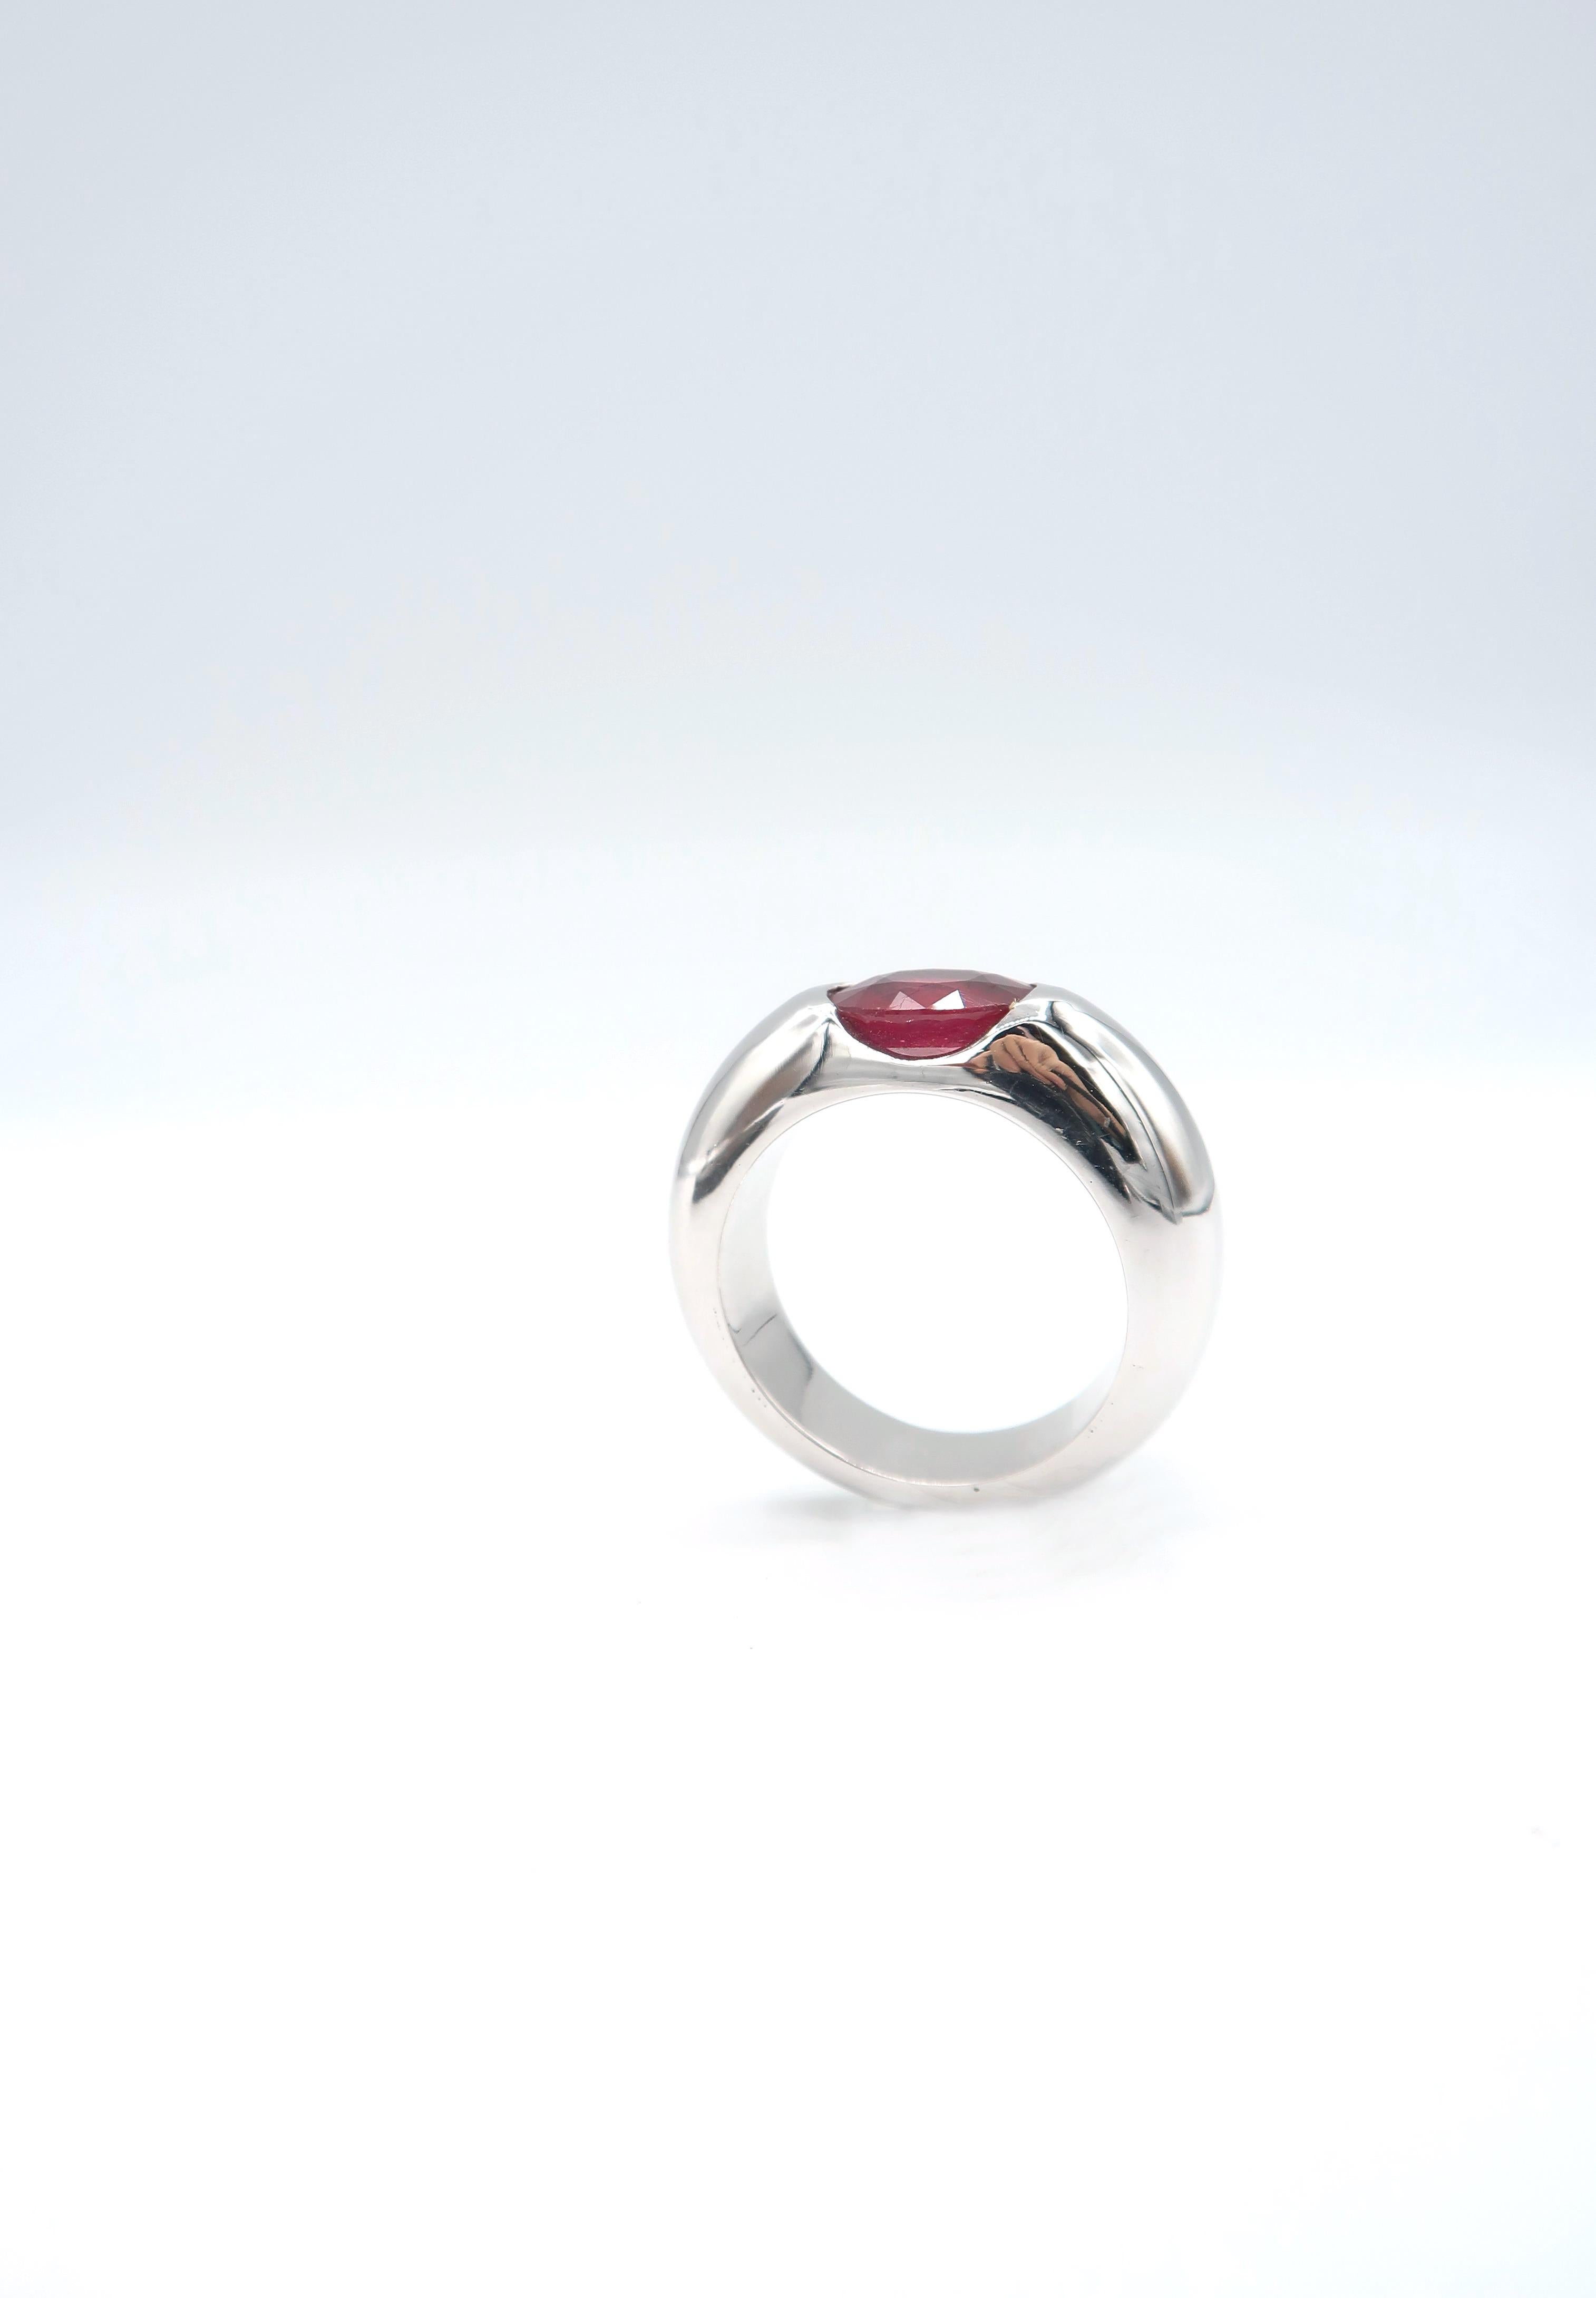 4-Carat Oval Ruby Mens Convex Ring in Plain 18K Gold

Ring Size: US 11/ UK V

Ruby: 4.0cts.
Gold: 18K Gold 15.50g.